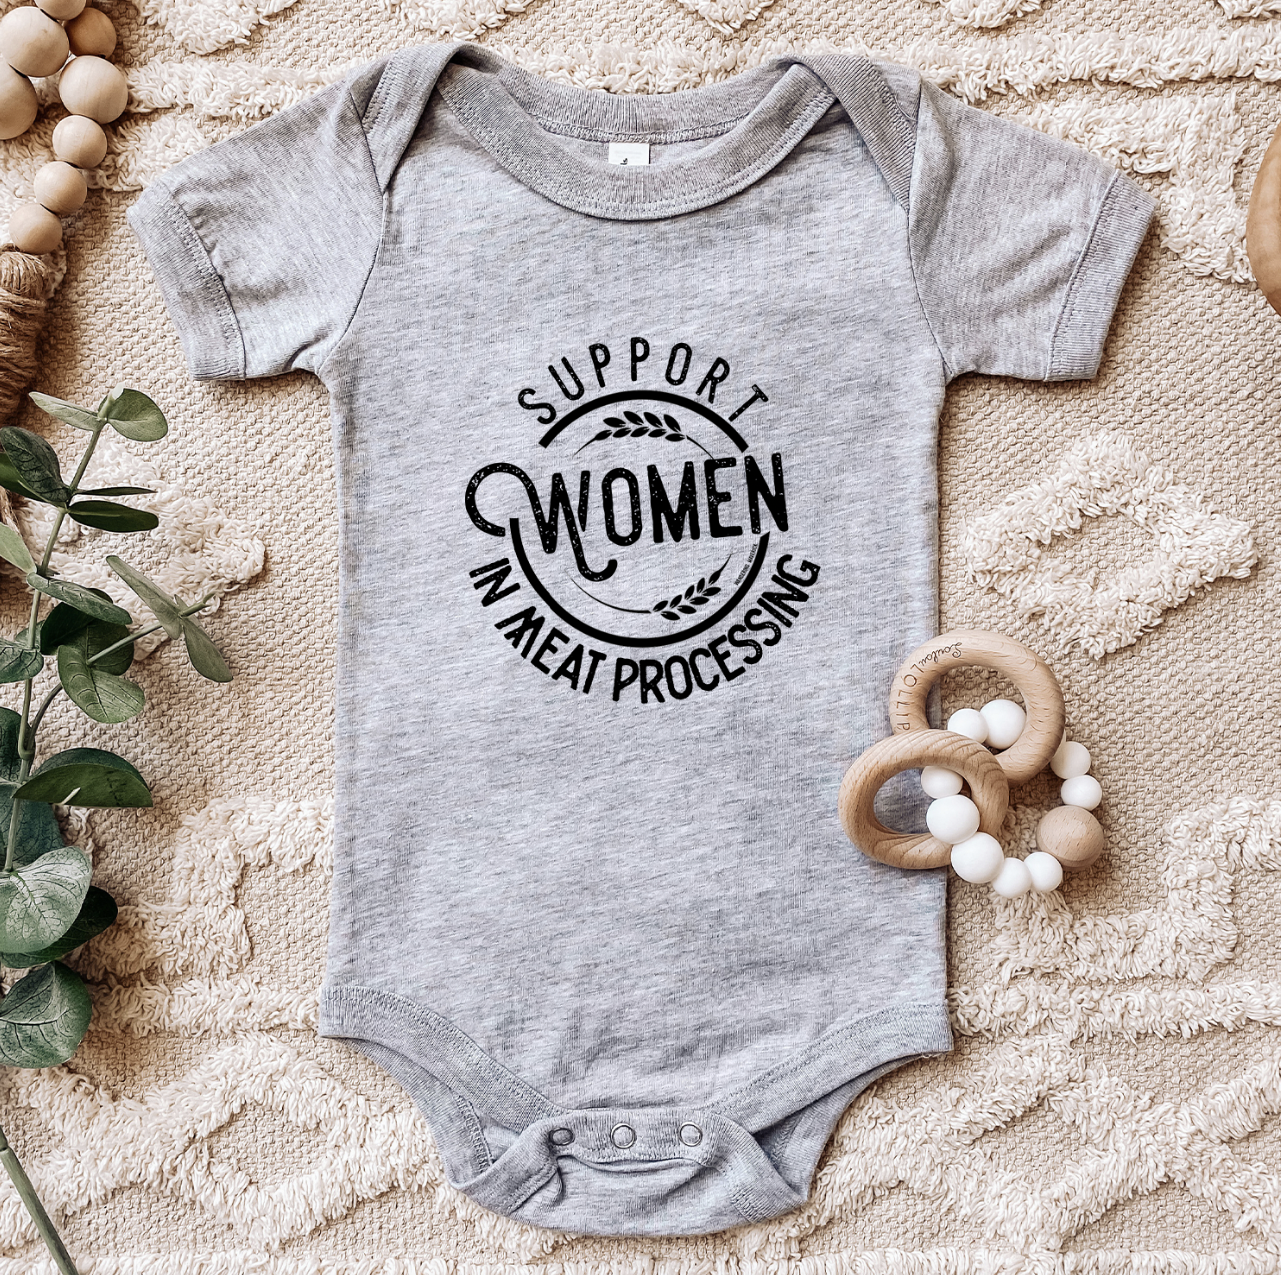 Support Women In Meat Processing One Piece/T-Shirt (Newborn - Youth XL) - Multiple Colors!